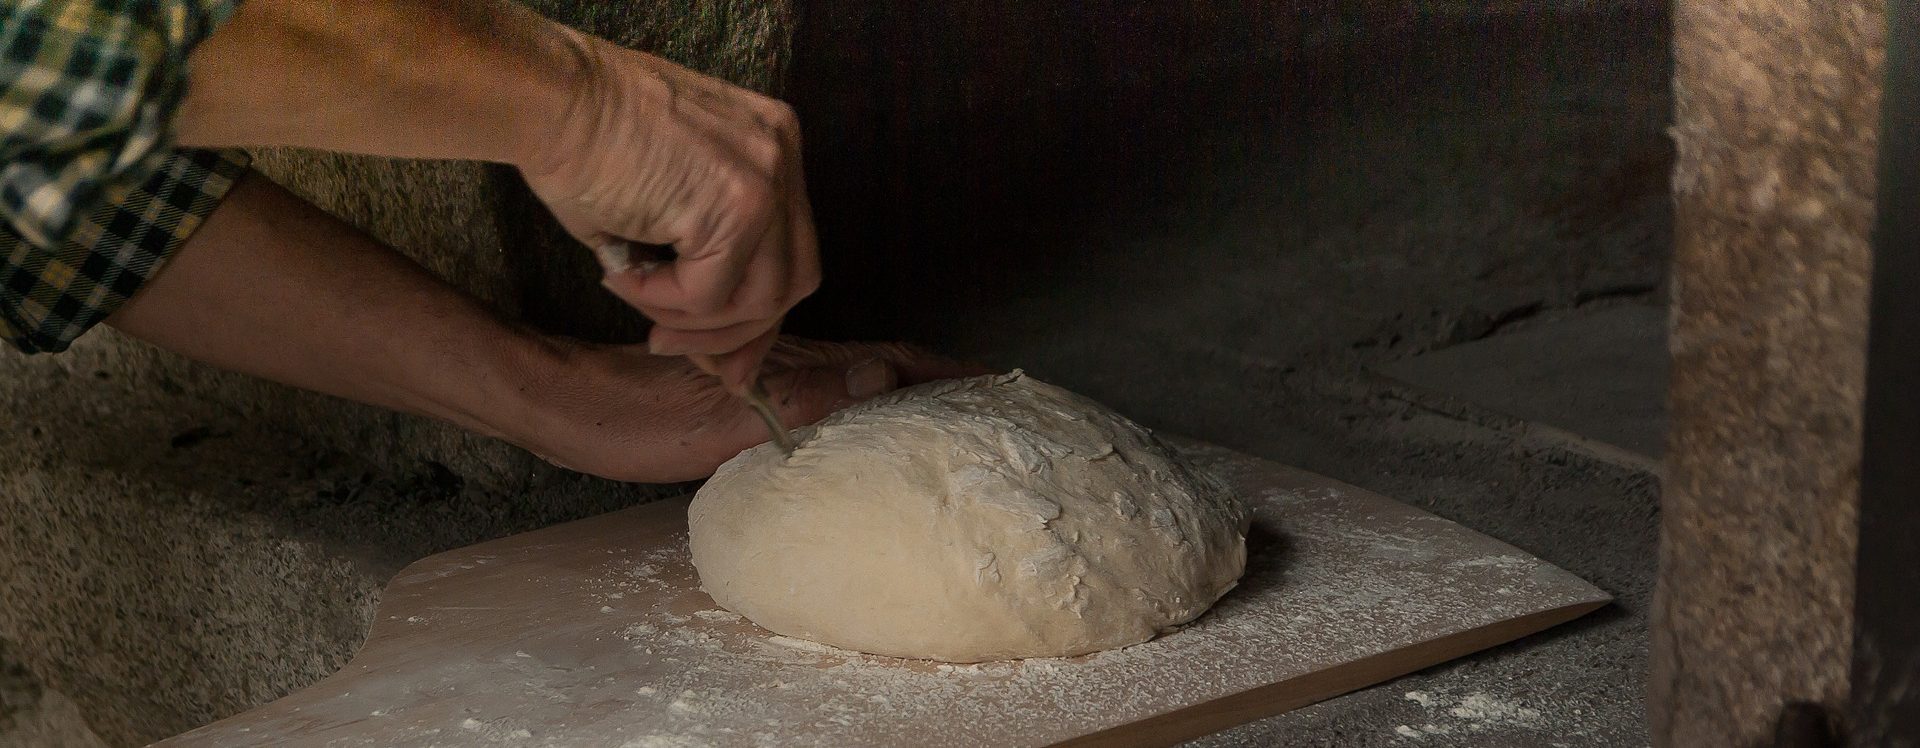 Hand working dough for bread